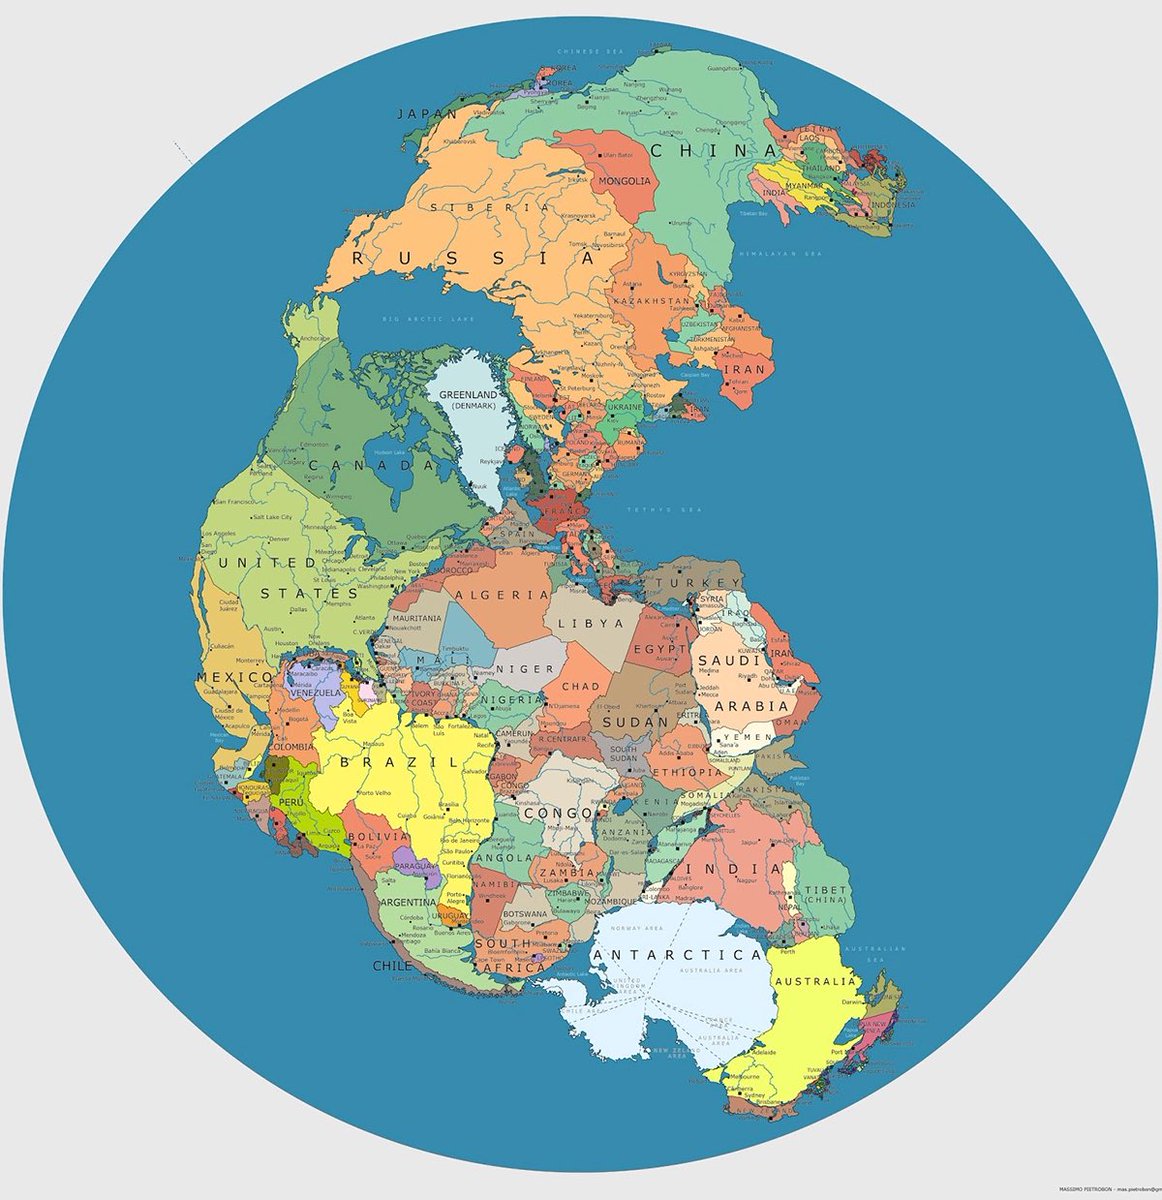 Can’t believe the libtards cancelled Pangea smh🤦‍♂️ #cancelcancelculture